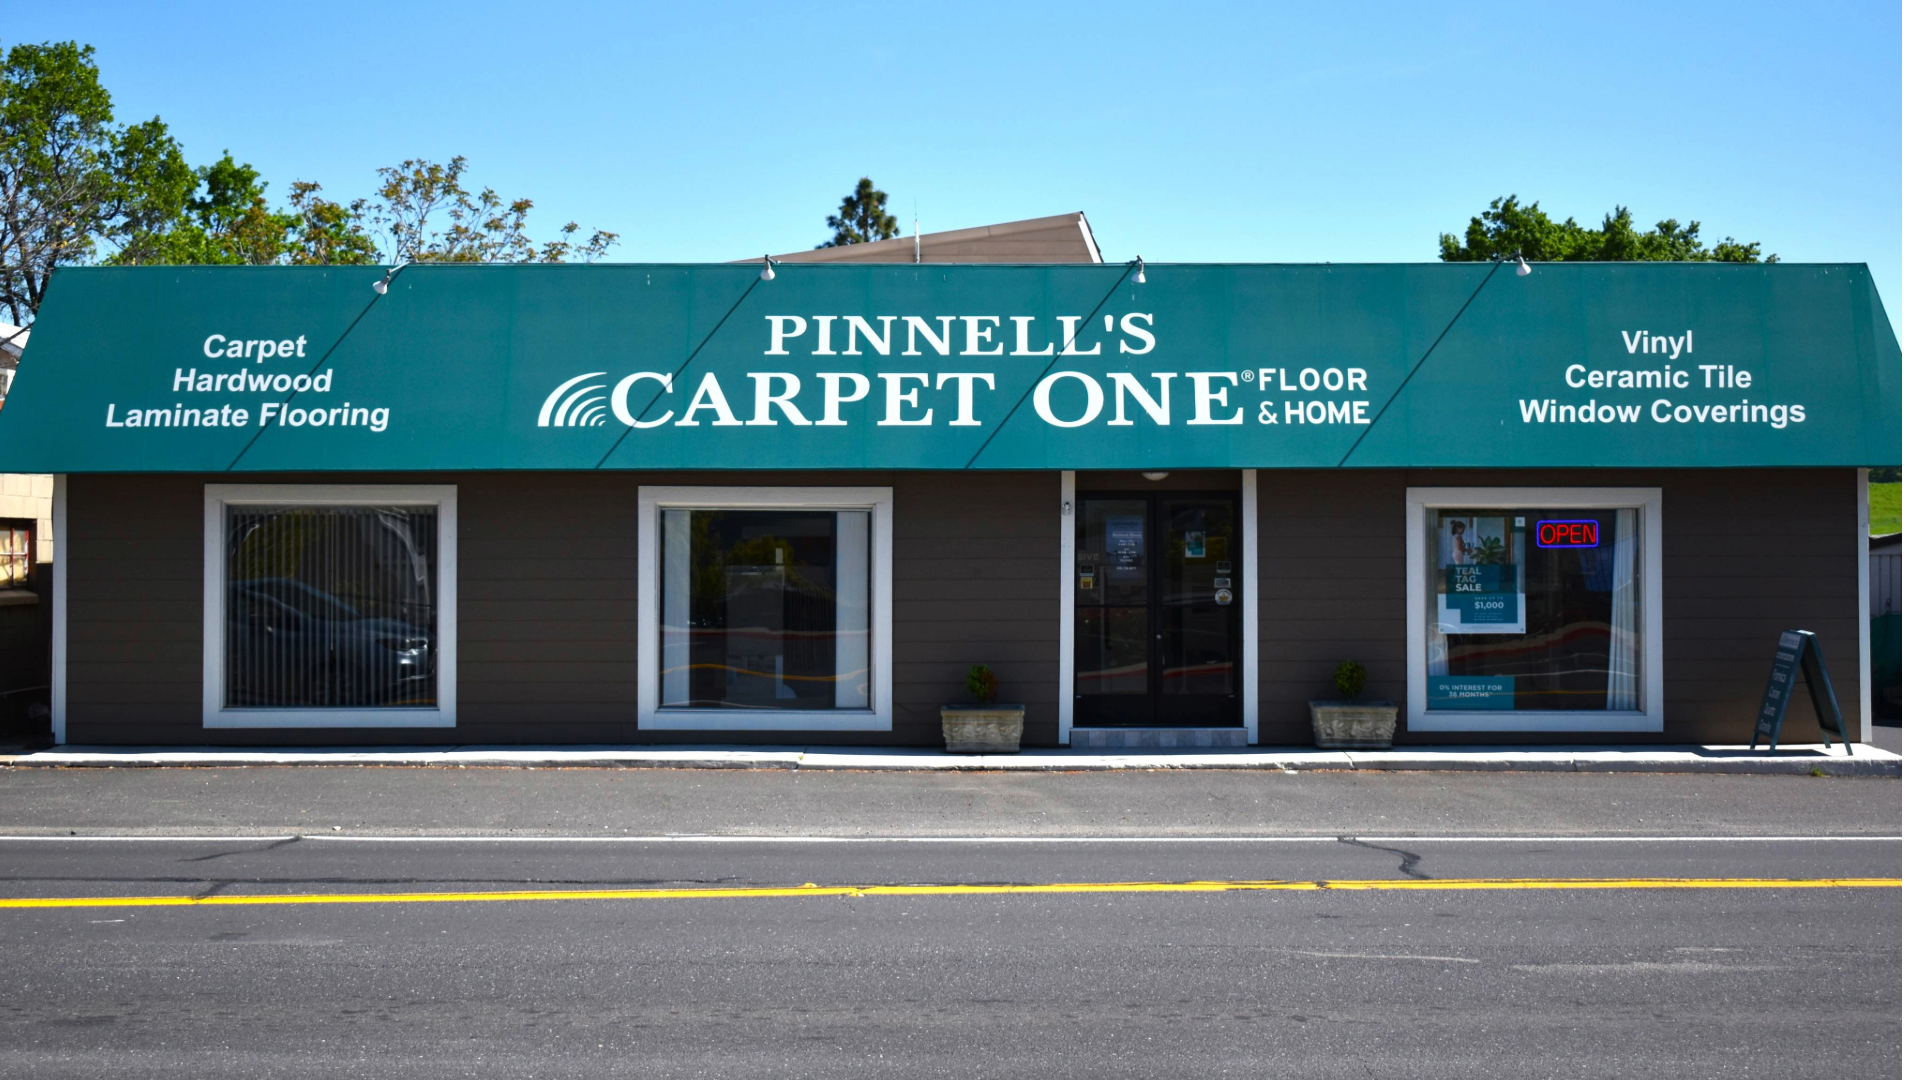 Pinnell's Carpet One, A local flooring Store in Angel's Camp Storefront is seen from the road.